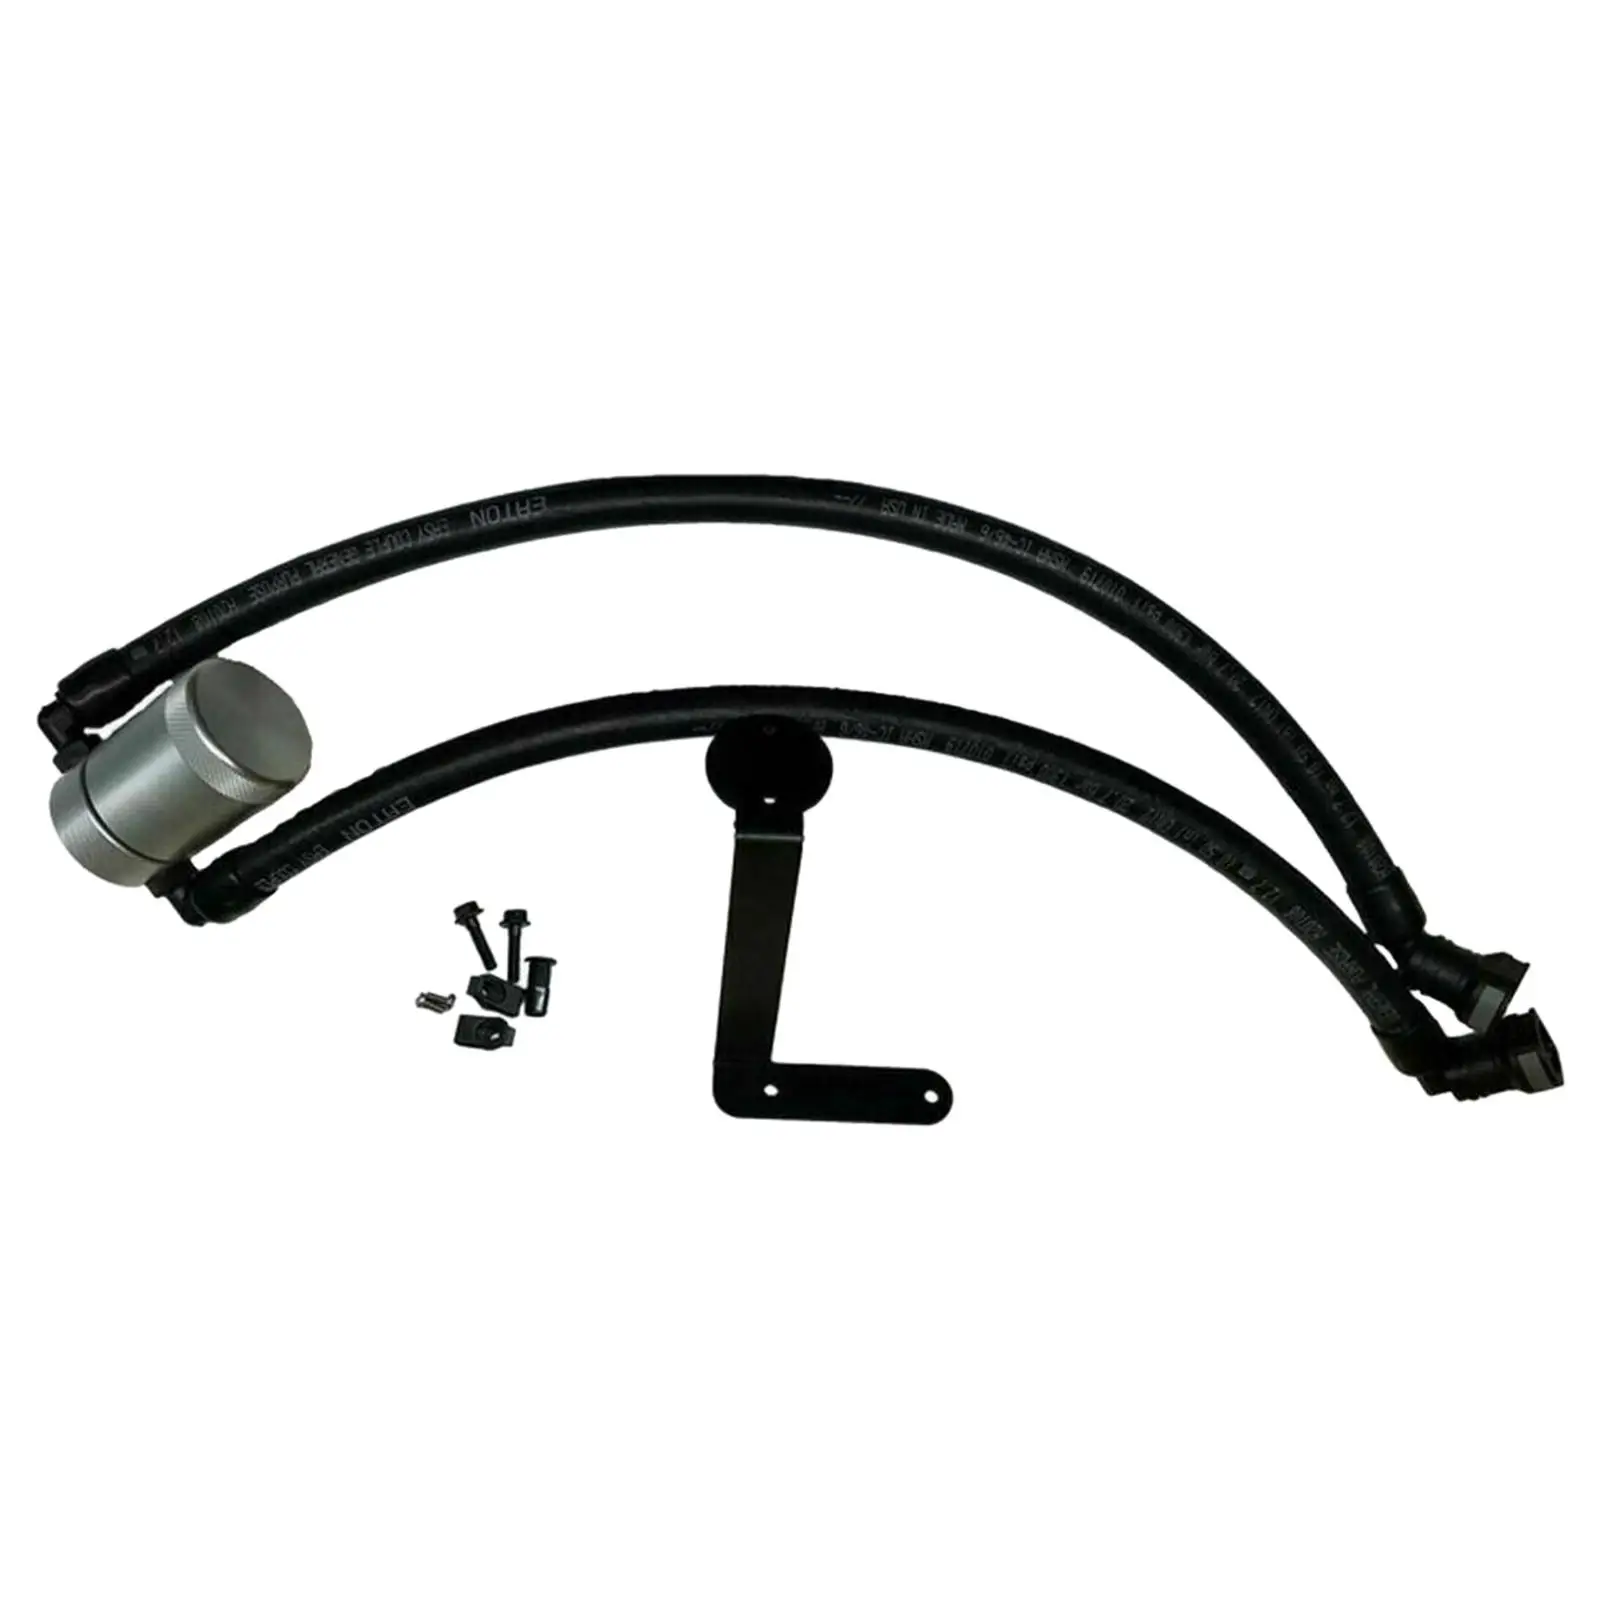 Passenger Side 3.0 Oil Separator Black Oil Catch Can for Ford F-150 2.7L 3.5L 5.0L Raptor Direct Replaces Accessories